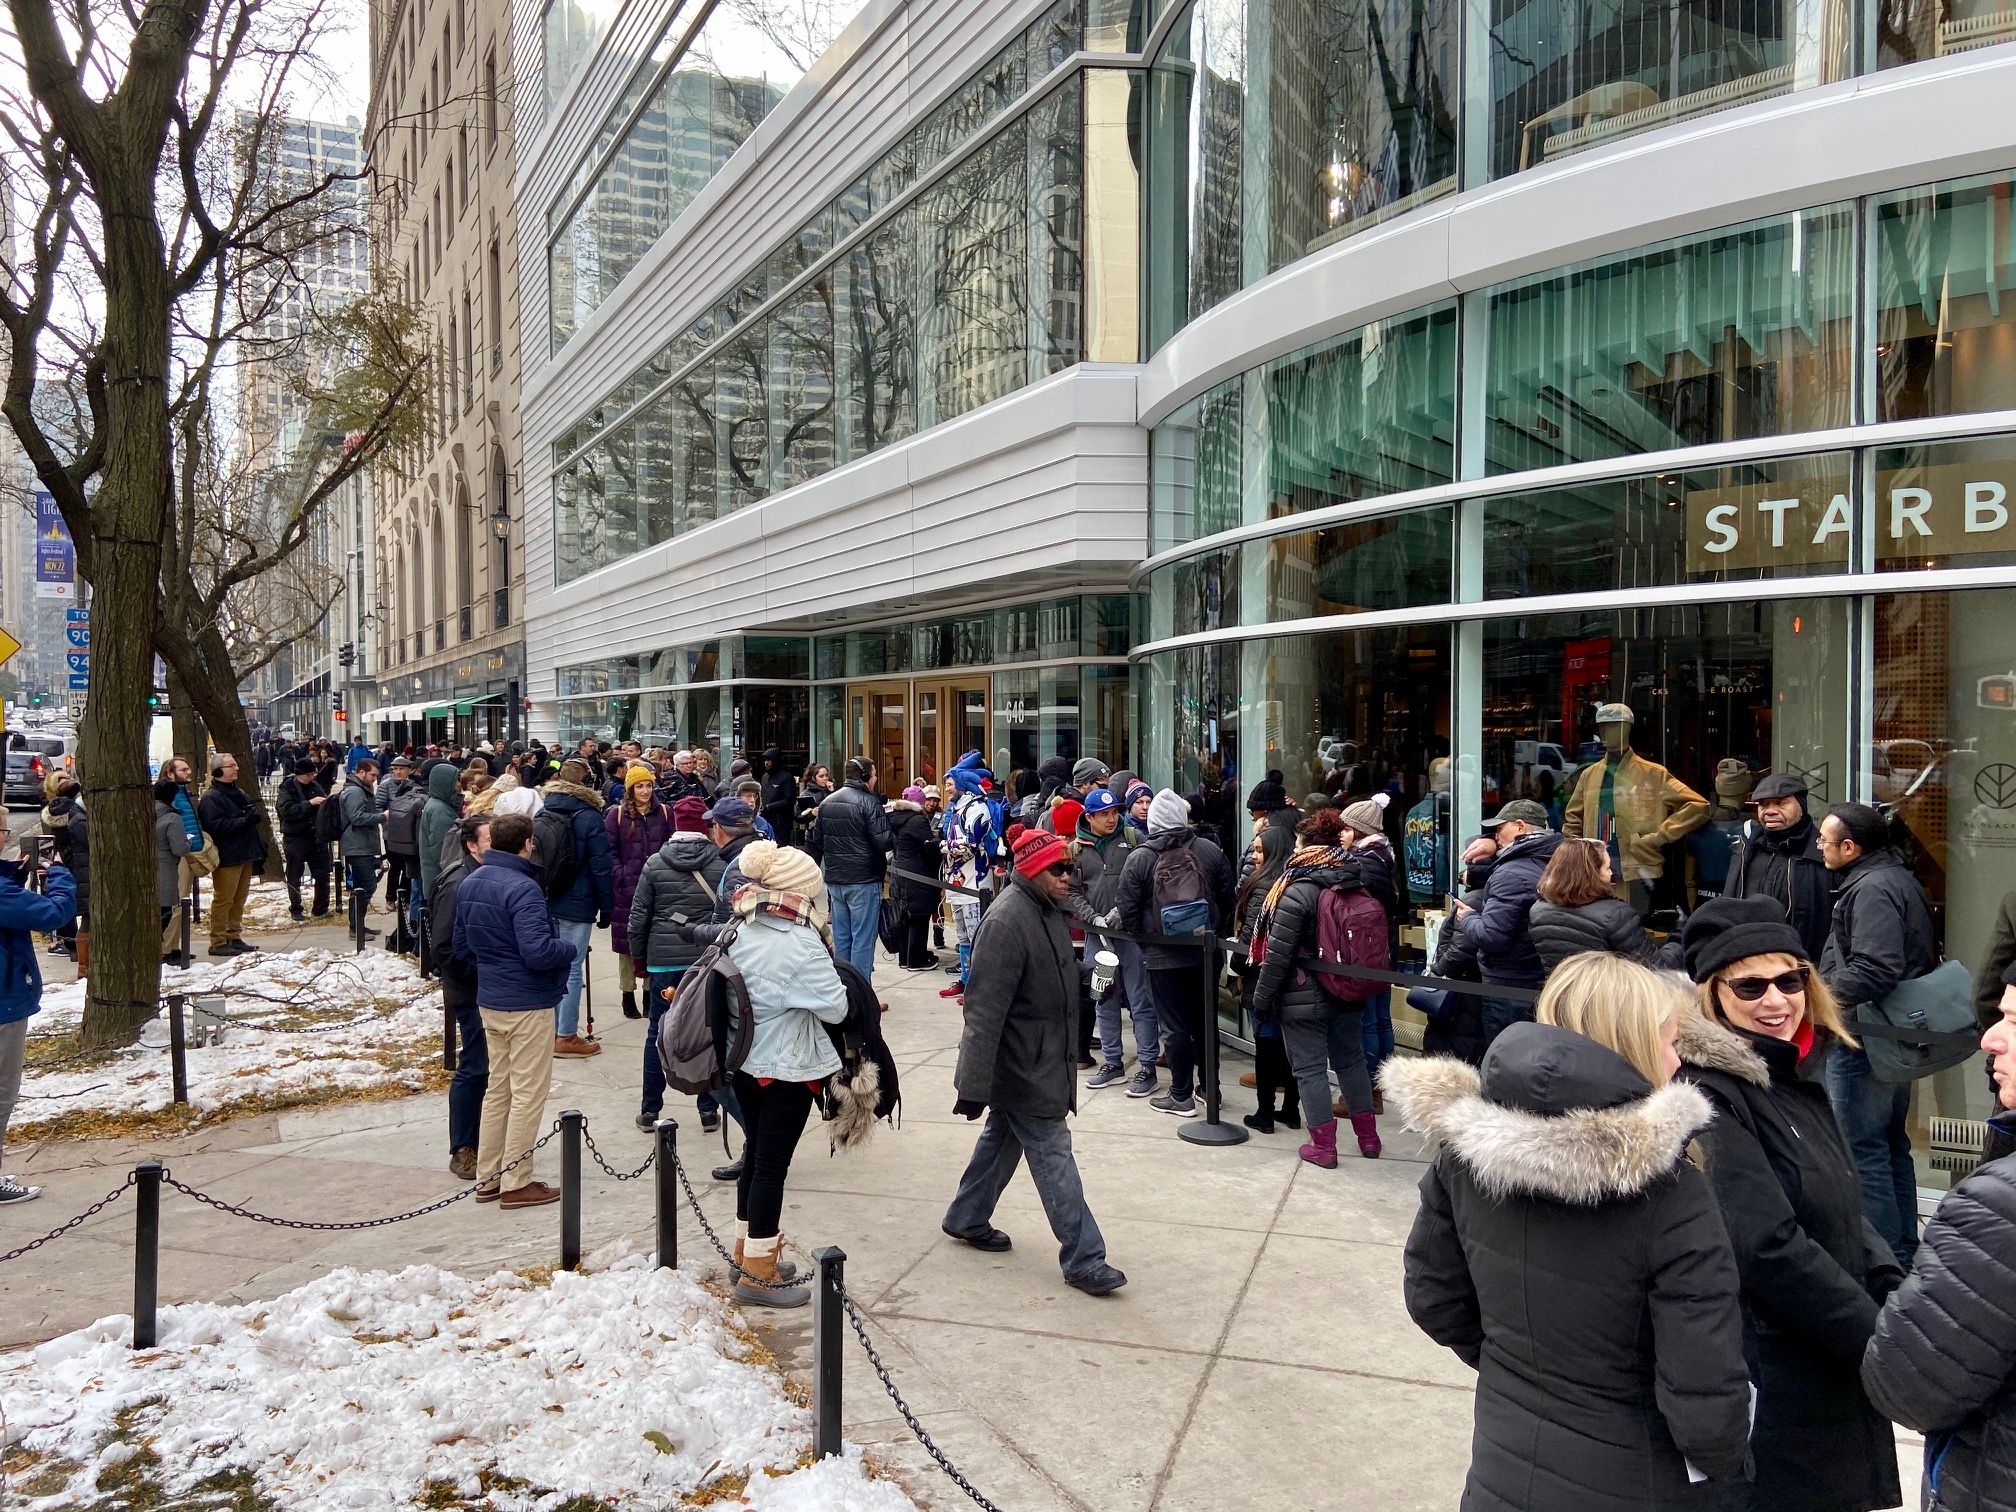 A large crowd of people waiting on the street outside the Starbucks Reserve Roastery in Chicago.